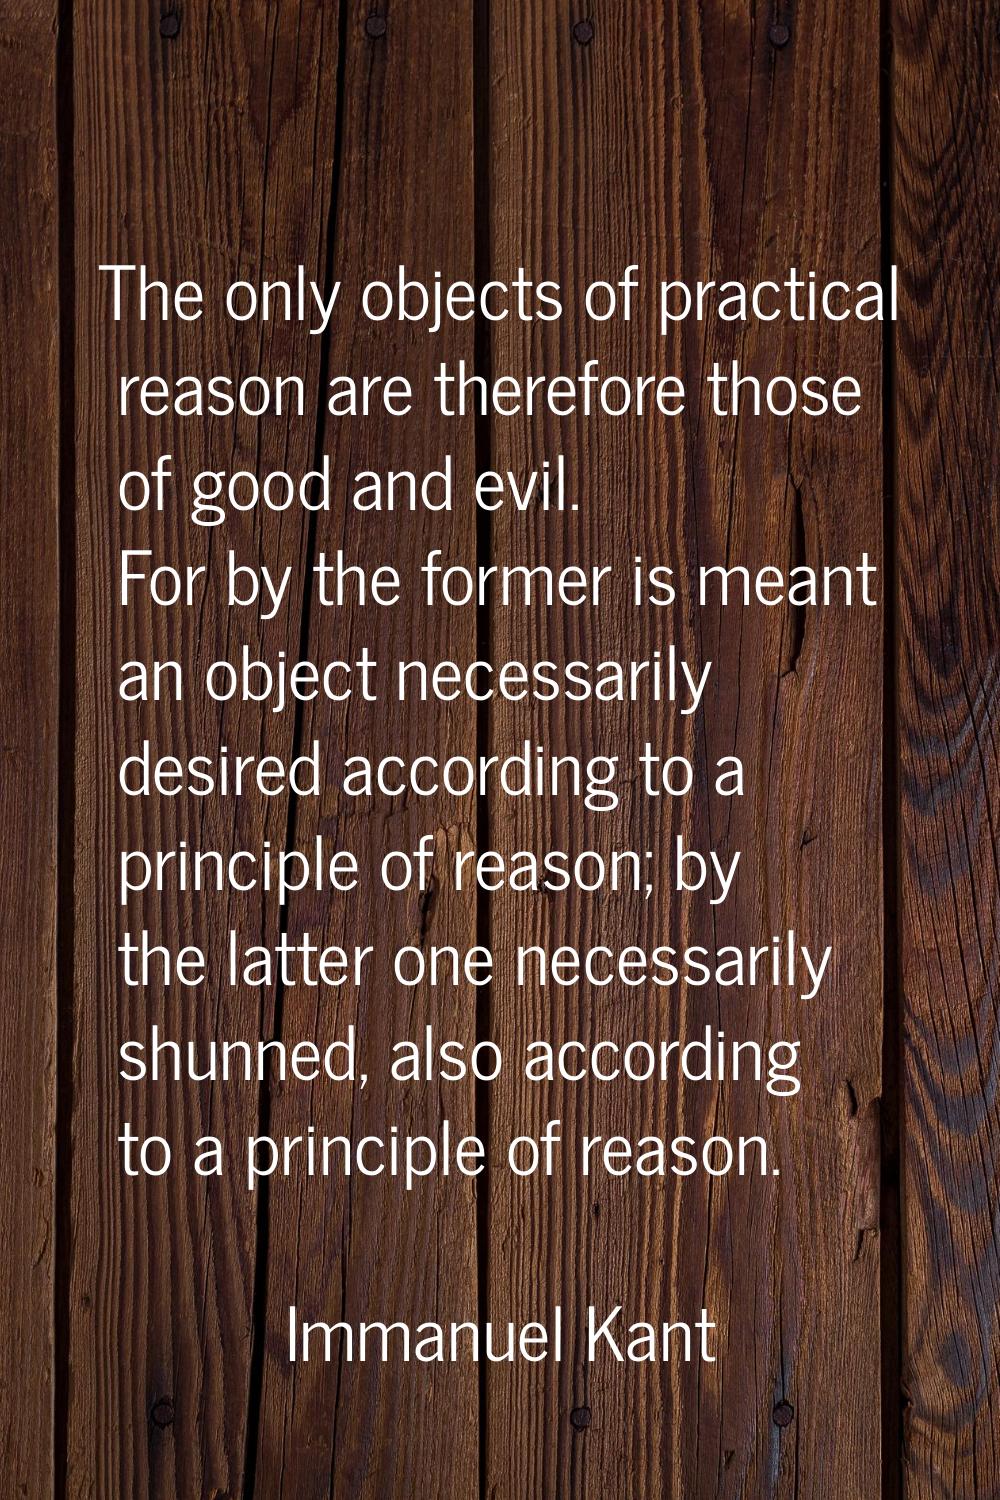 The only objects of practical reason are therefore those of good and evil. For by the former is mea